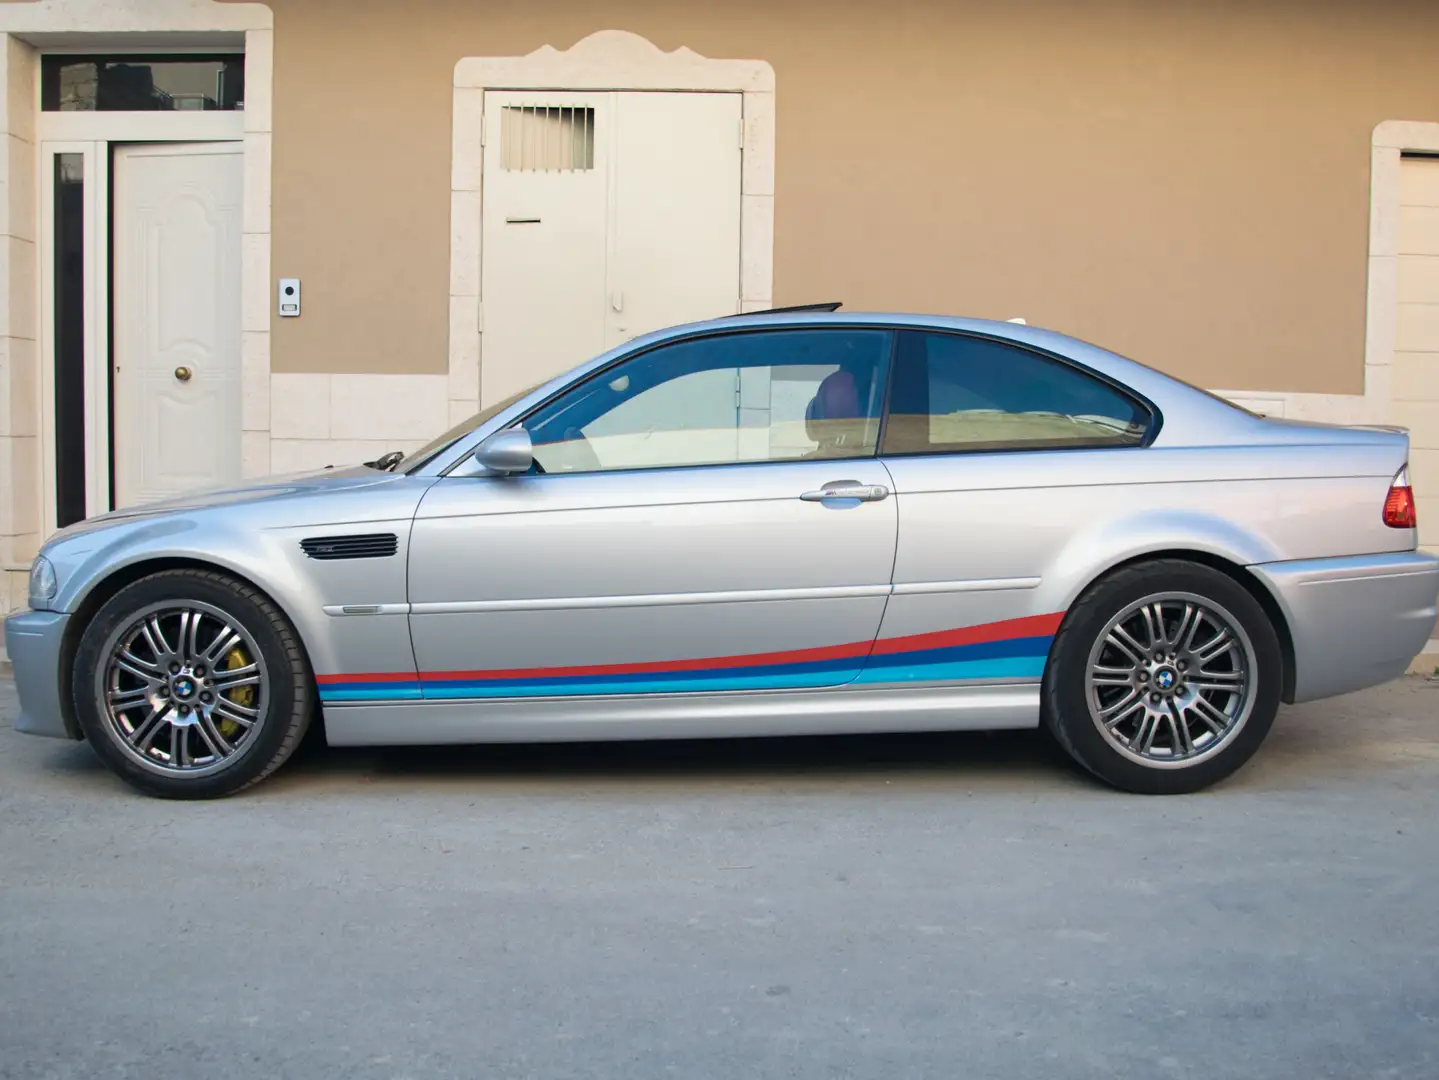 BMW M3 coupe manuale ASI con CRS siva - 2